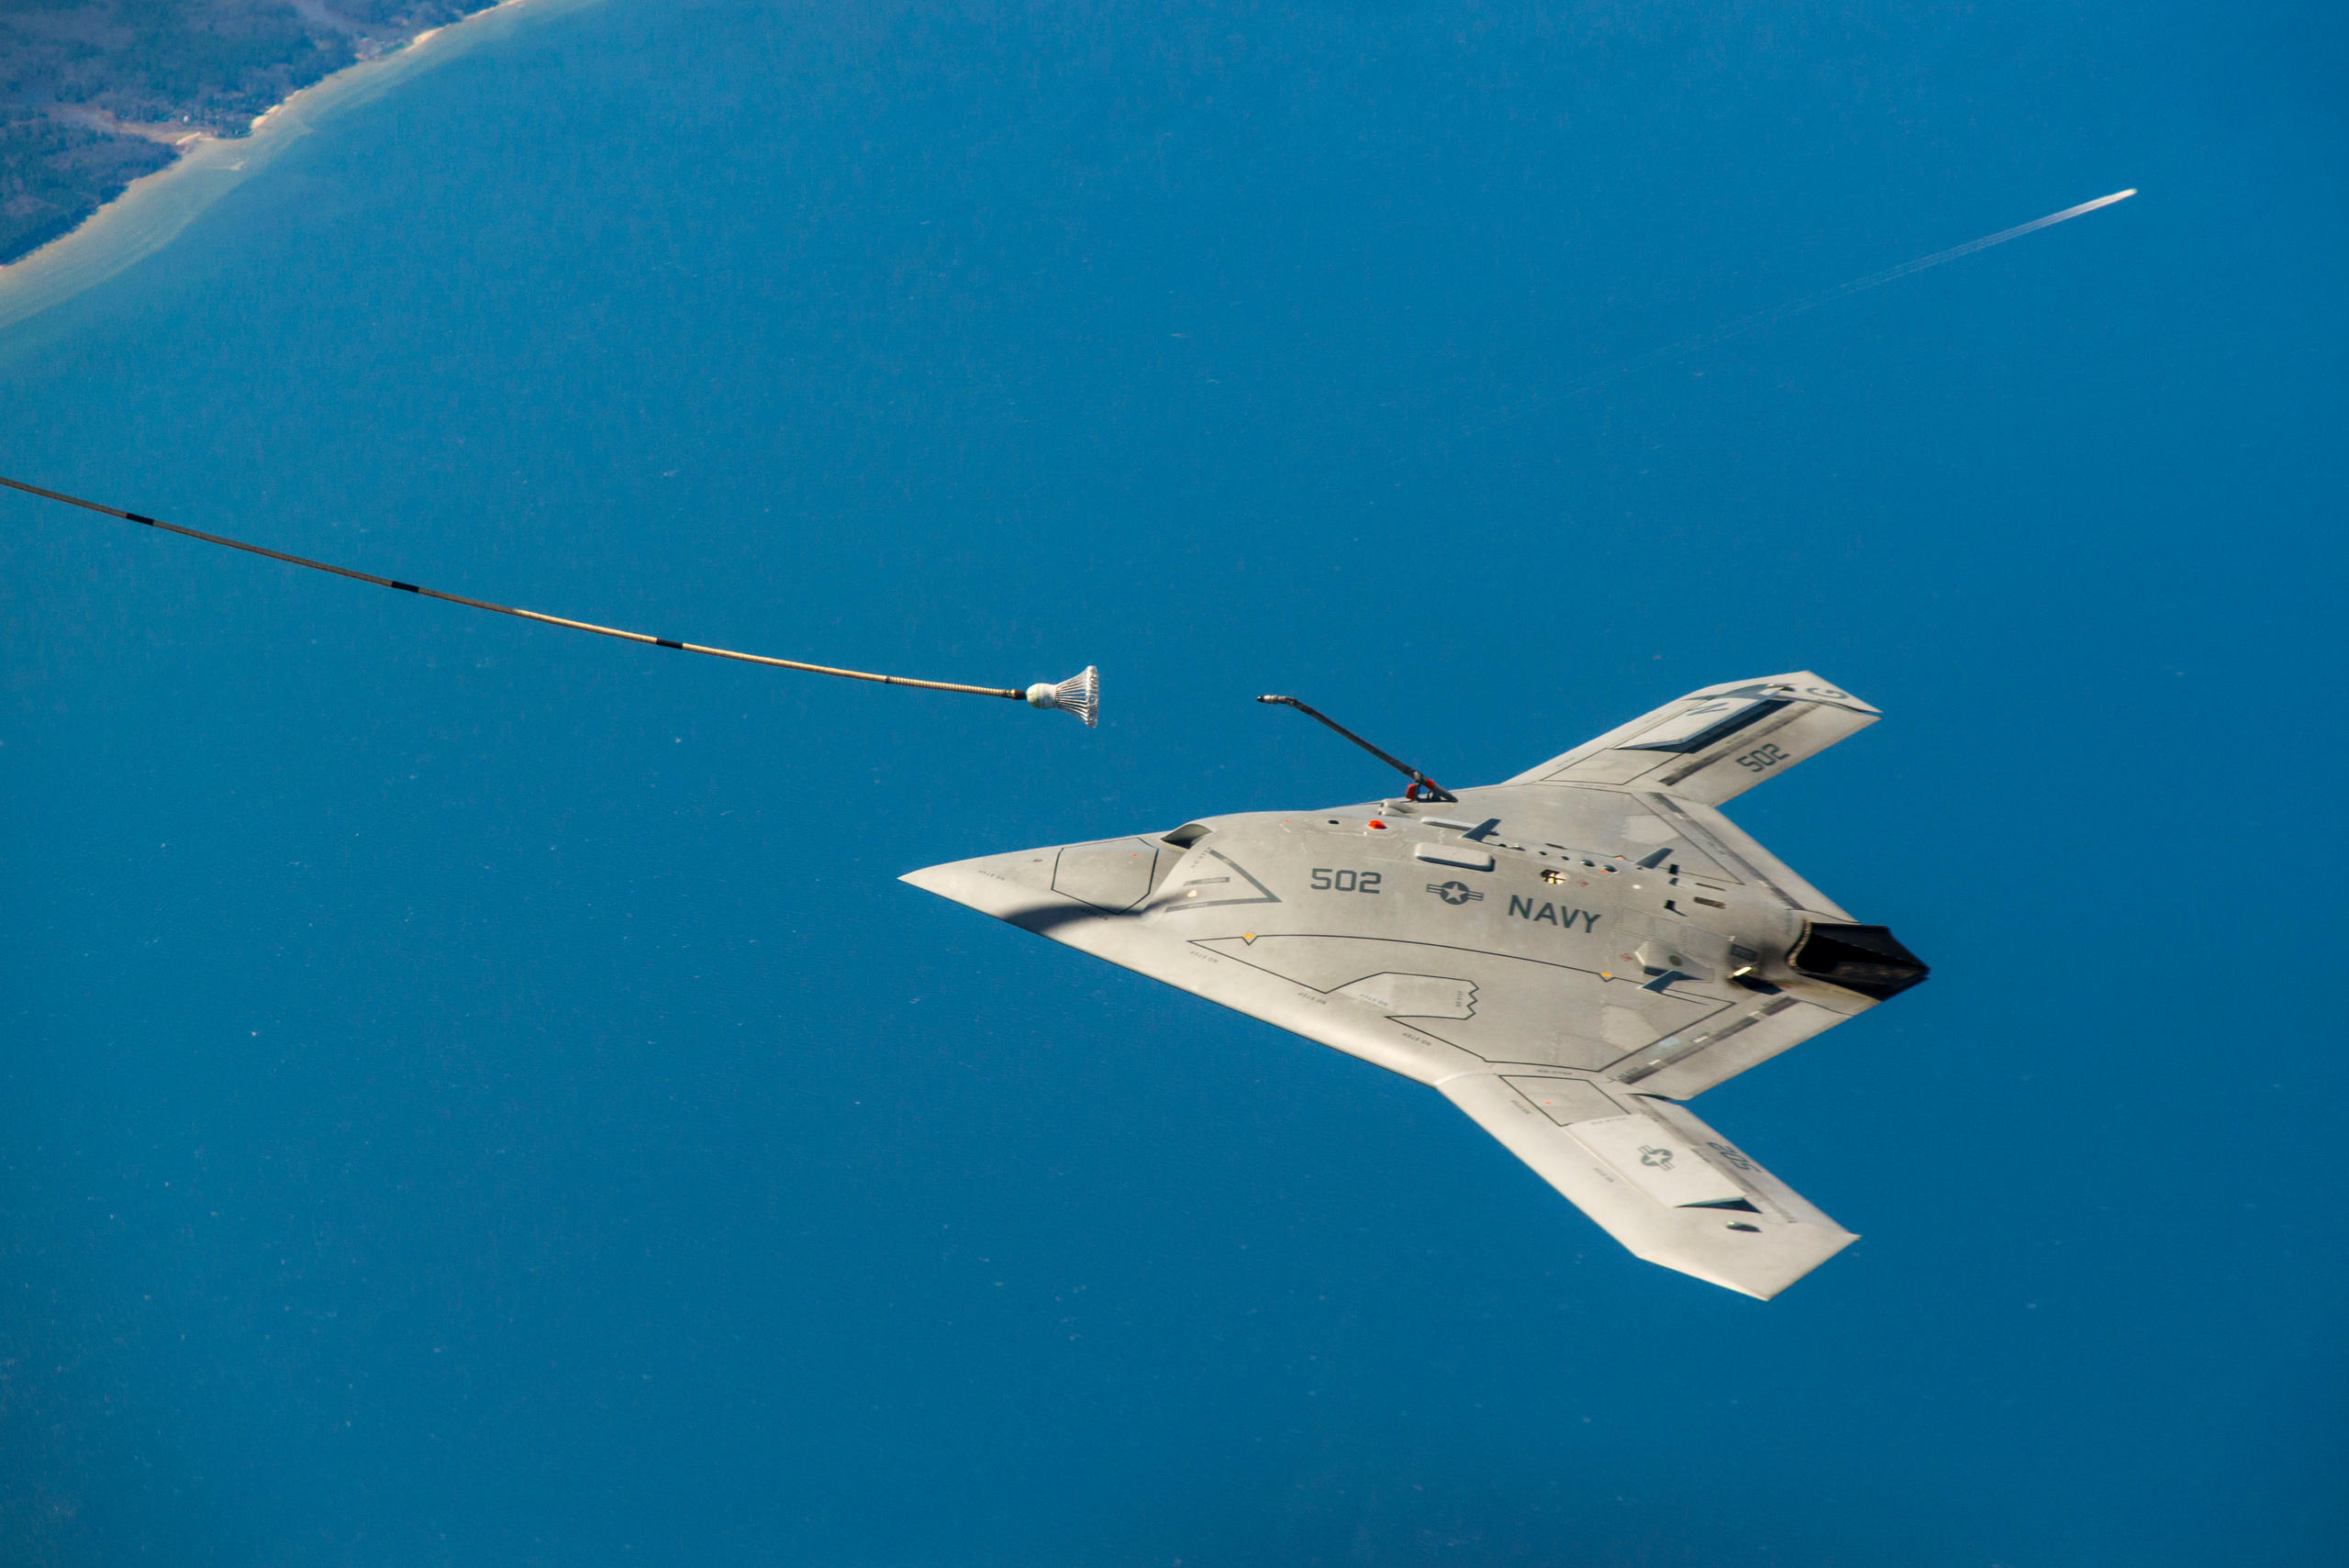 The US X-47B unmanned autonomous aircraft being tested in 2015